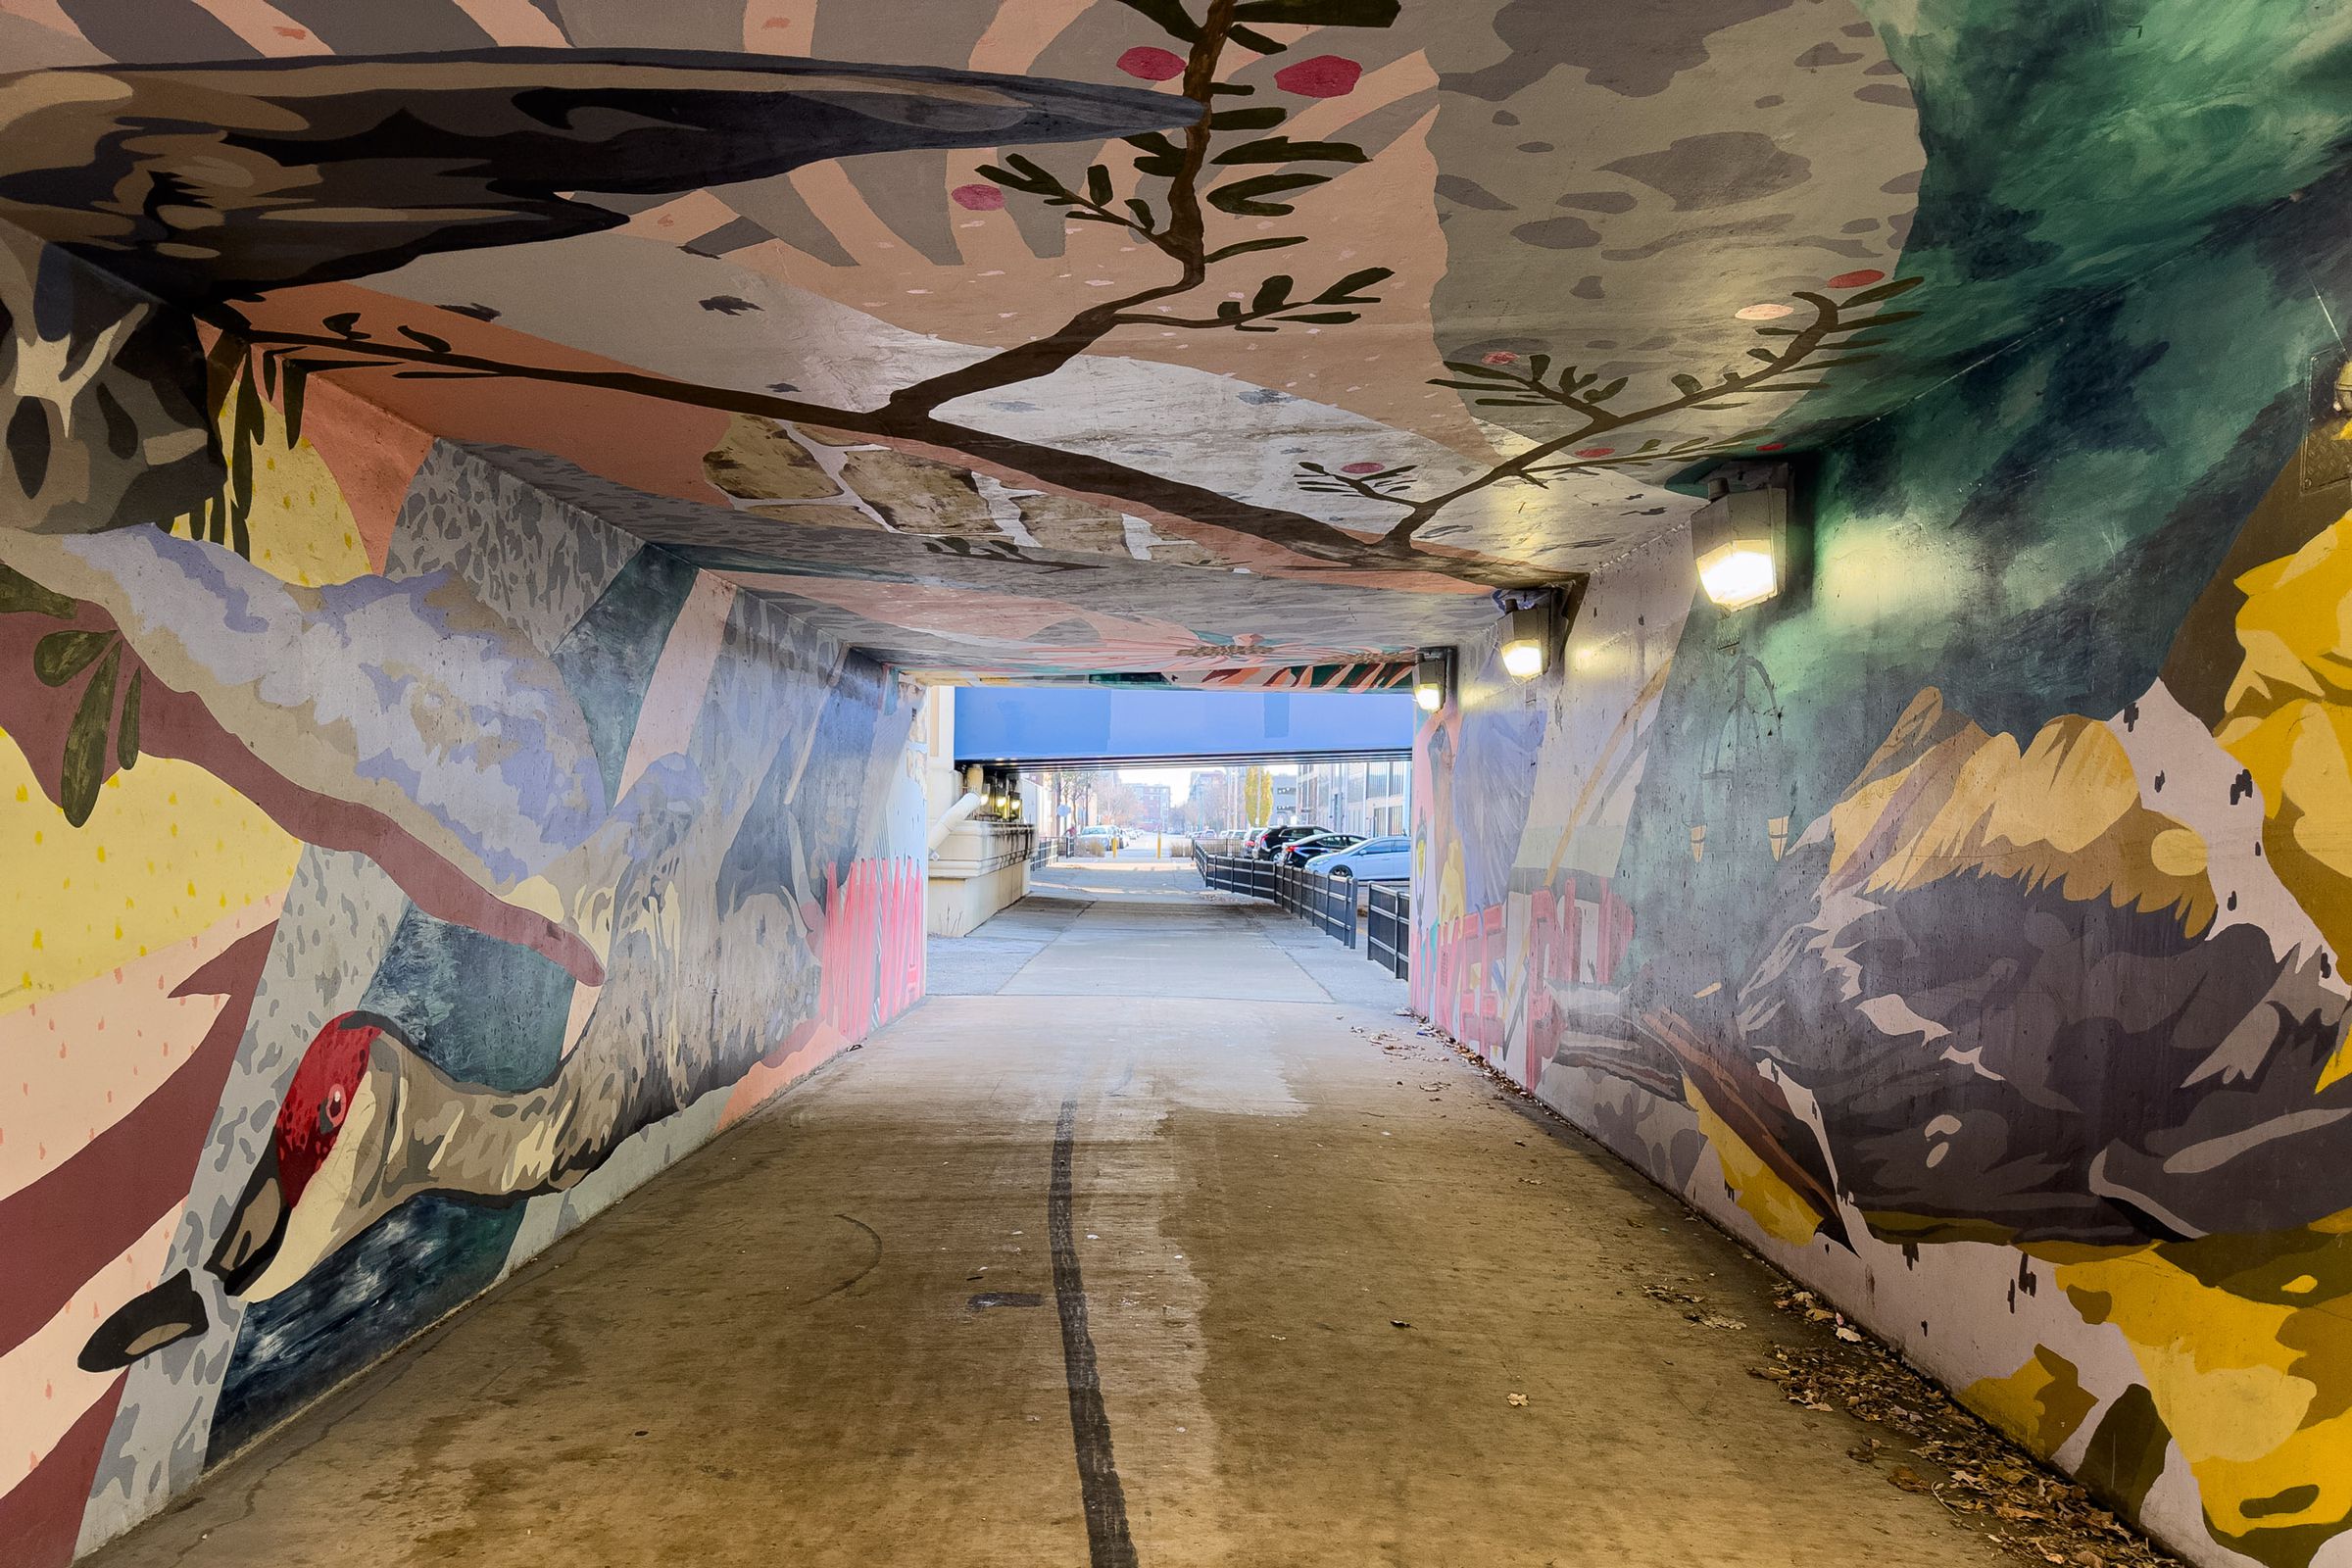 A picture from a tunnel passing beneath a highway, the walls and ceiling covered in artwork.